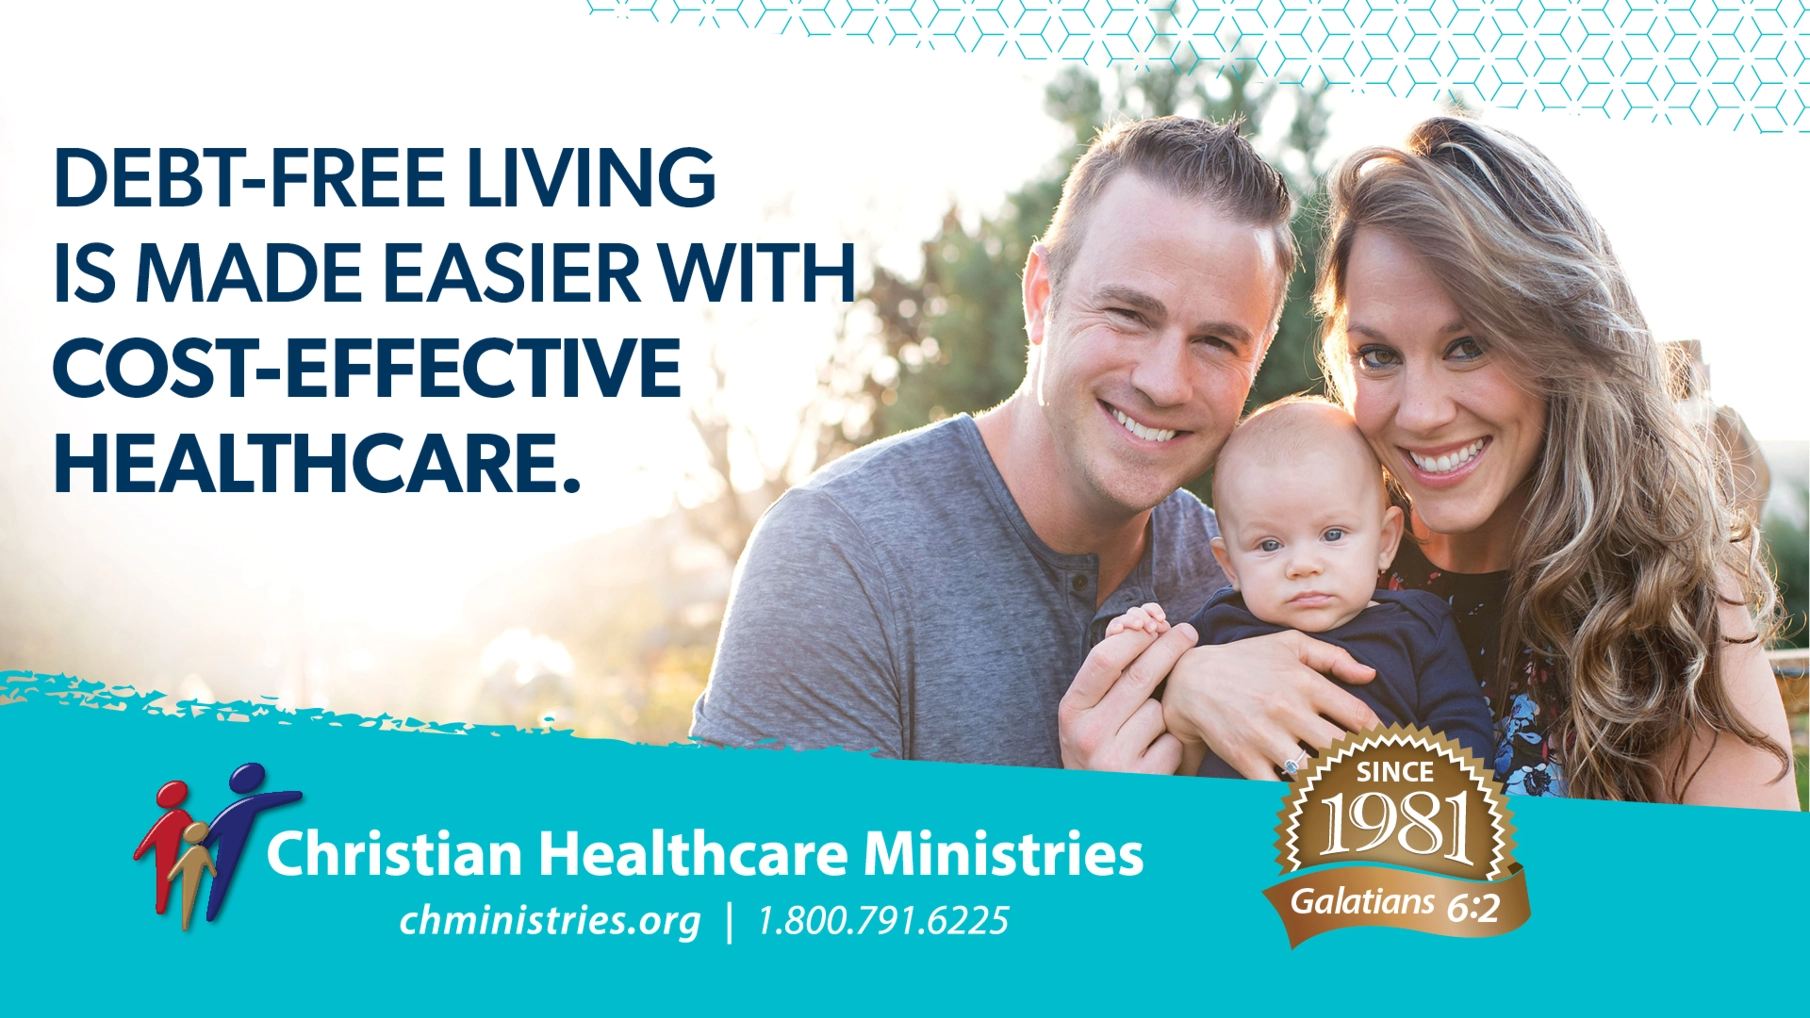 Business Boutique Christian Healthcare Ministries ad slide graphic